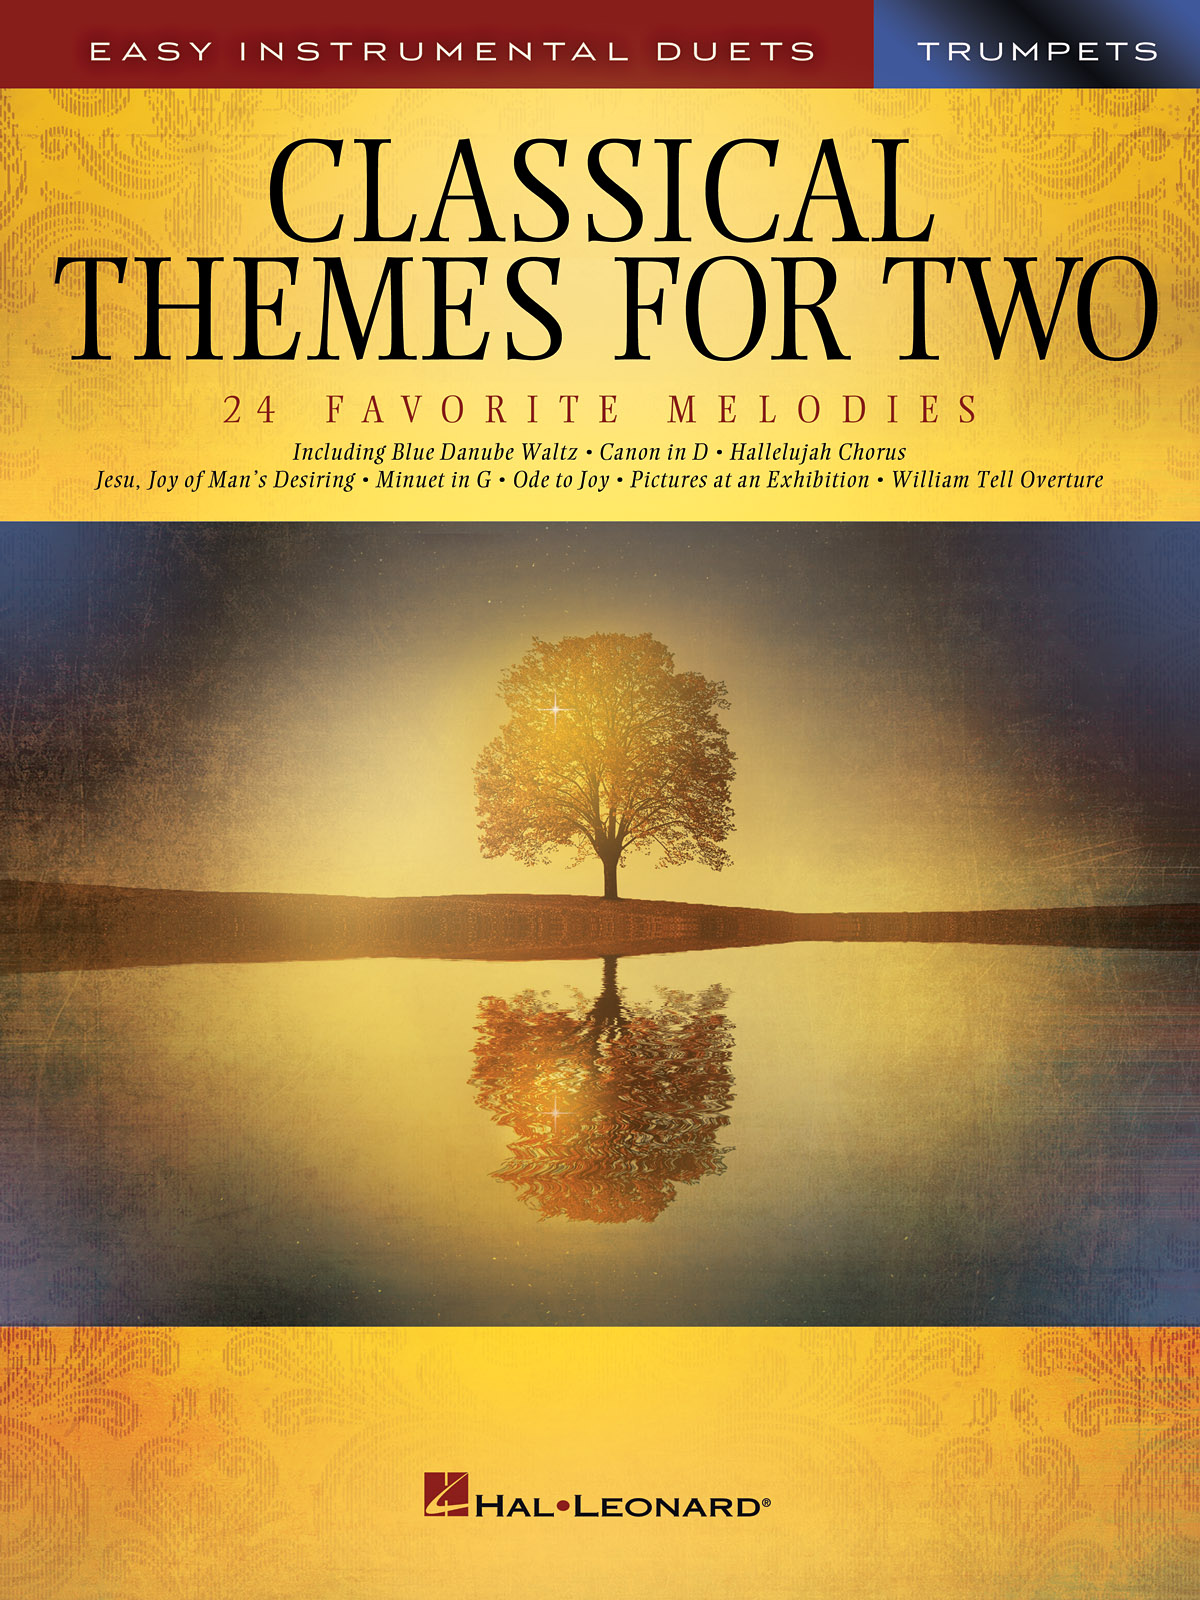 Classical Themes for Two pro trumpety - Easy Instrumental Duets